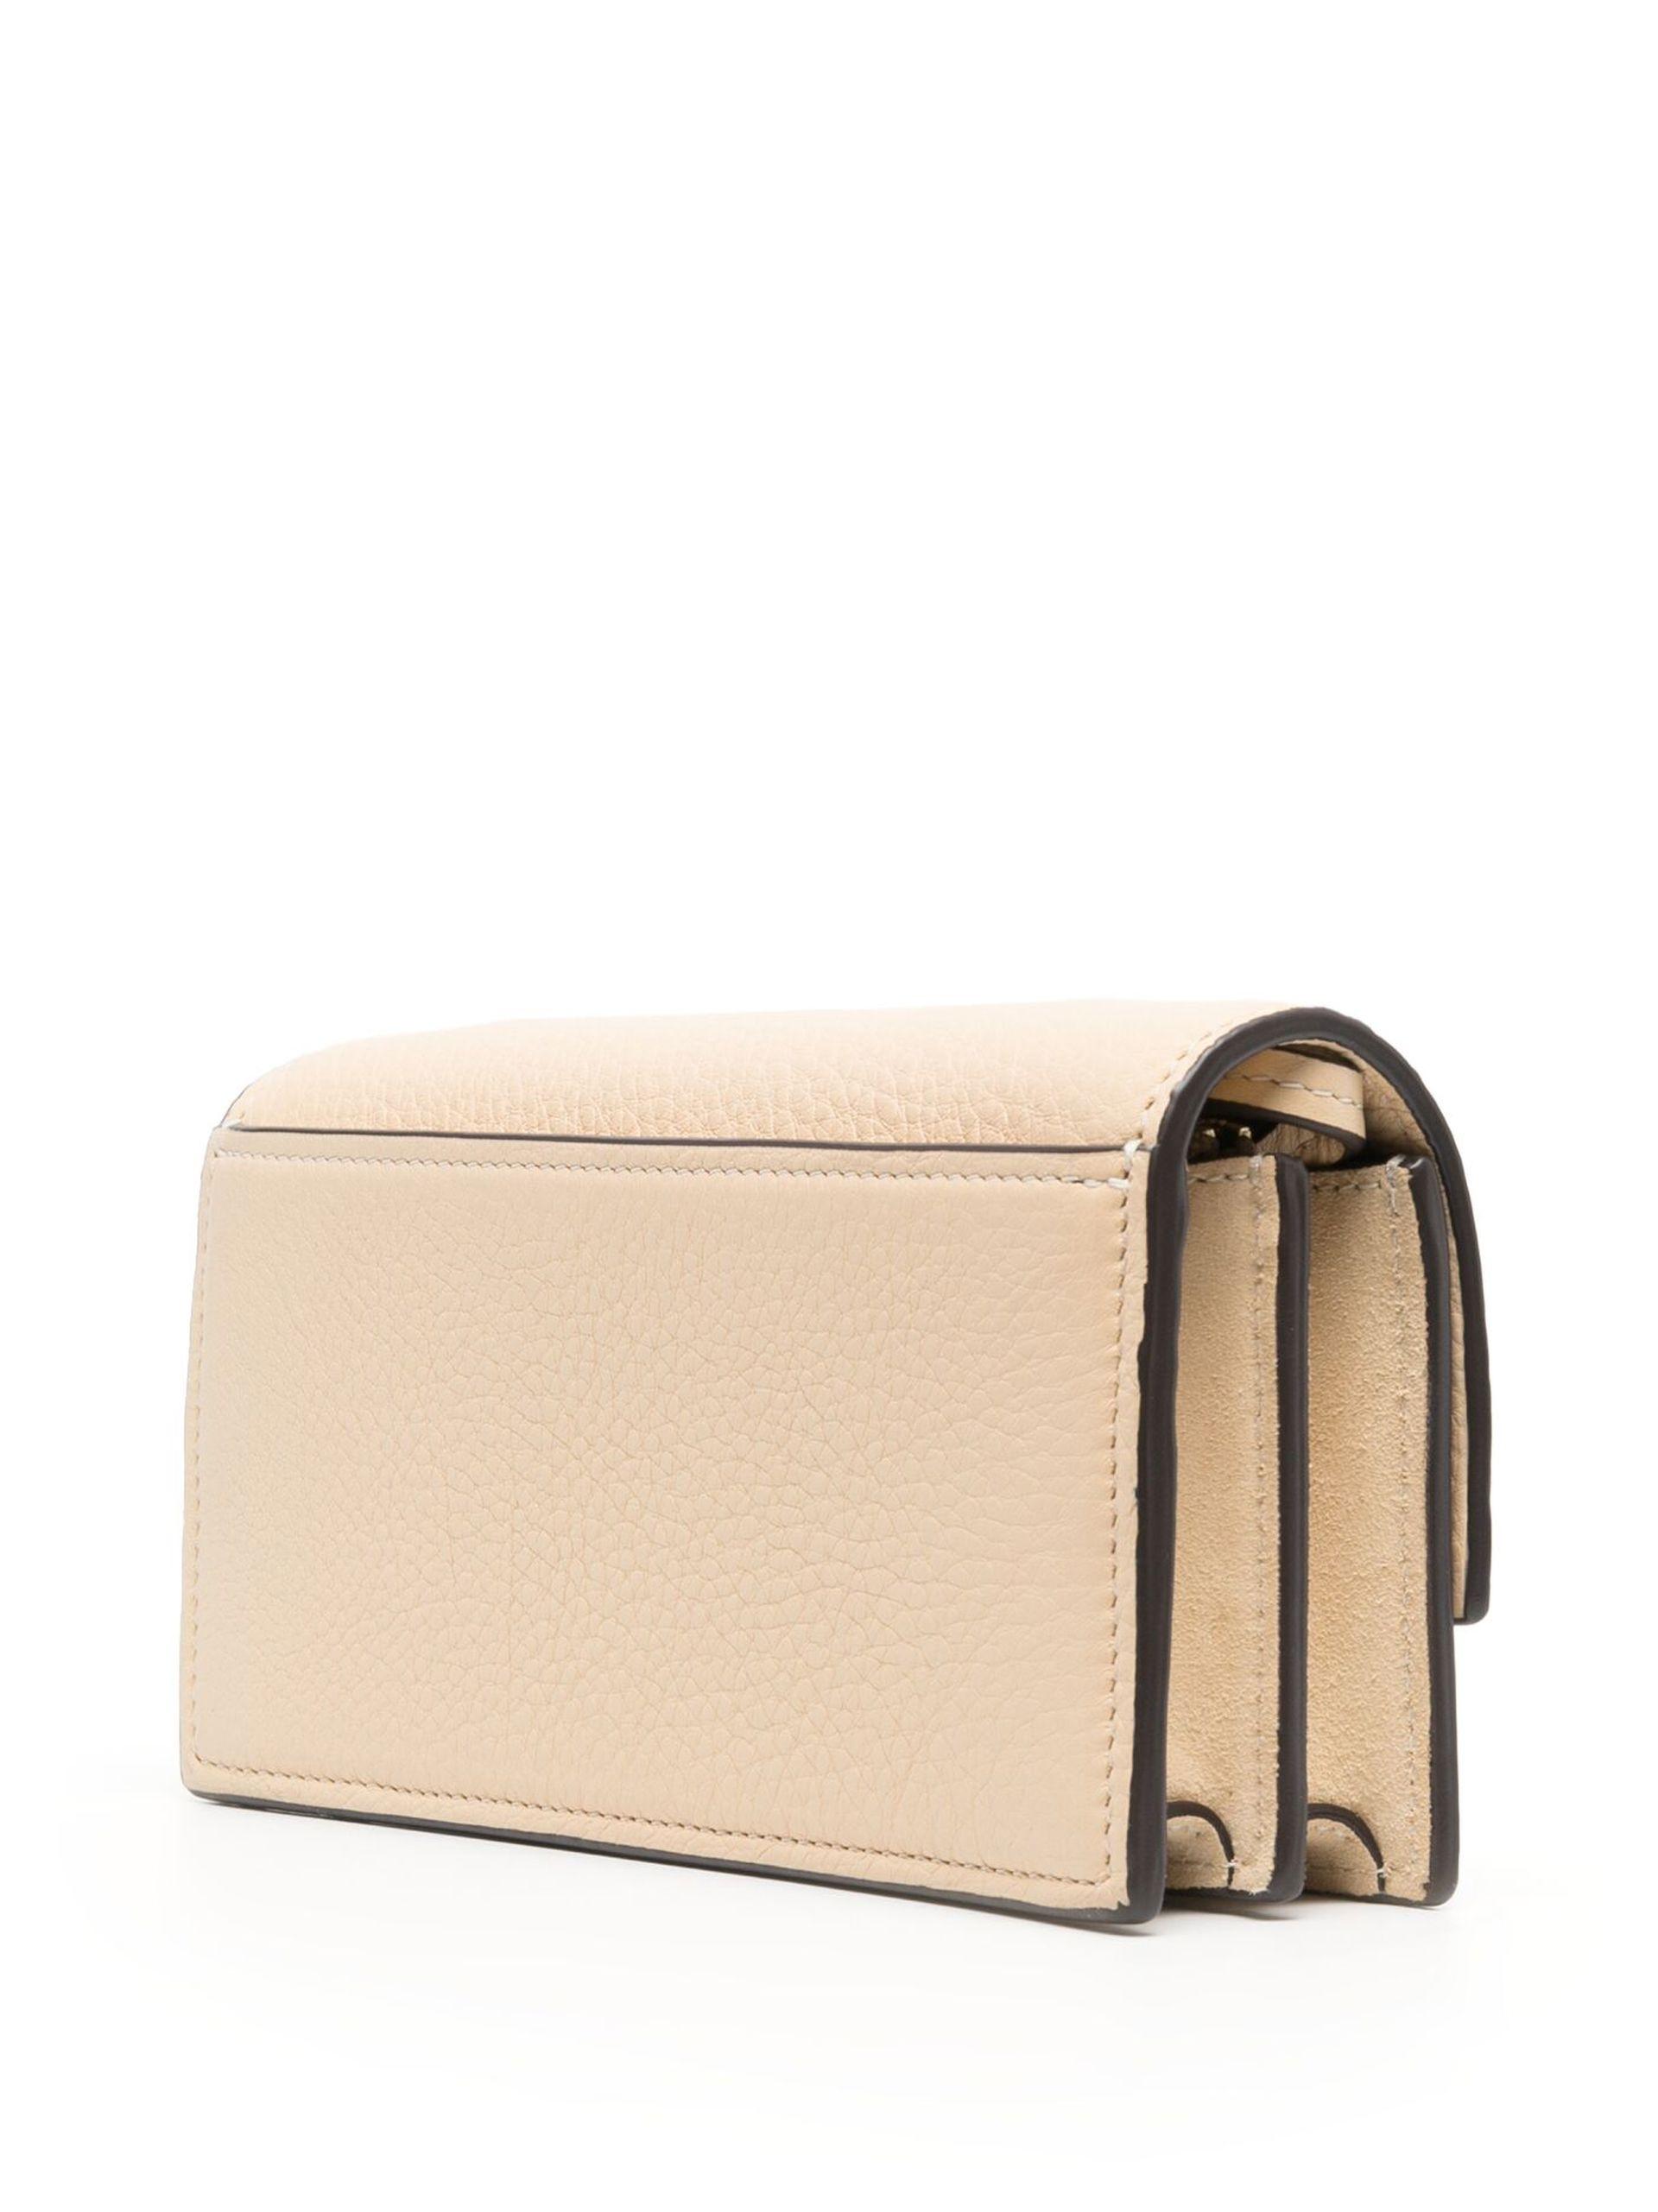 Tory Burch Neutral Miller Leather Chain Wallet in Natural | Lyst